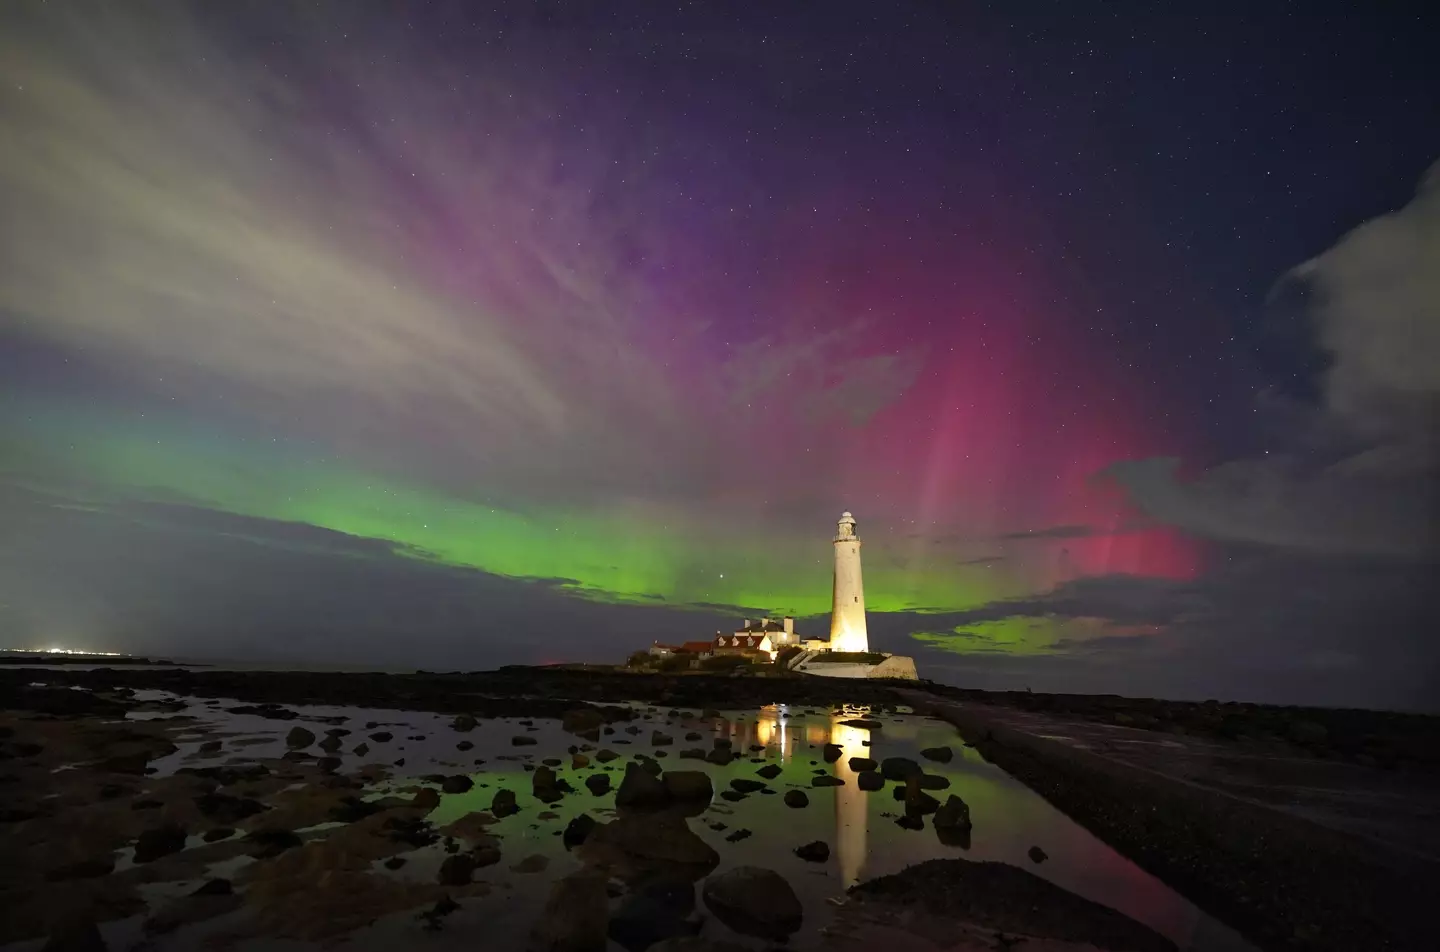 The Northern Lights pictured on the horizon at St Mary's Lighthouse in Whitley Bay on the North East coast.